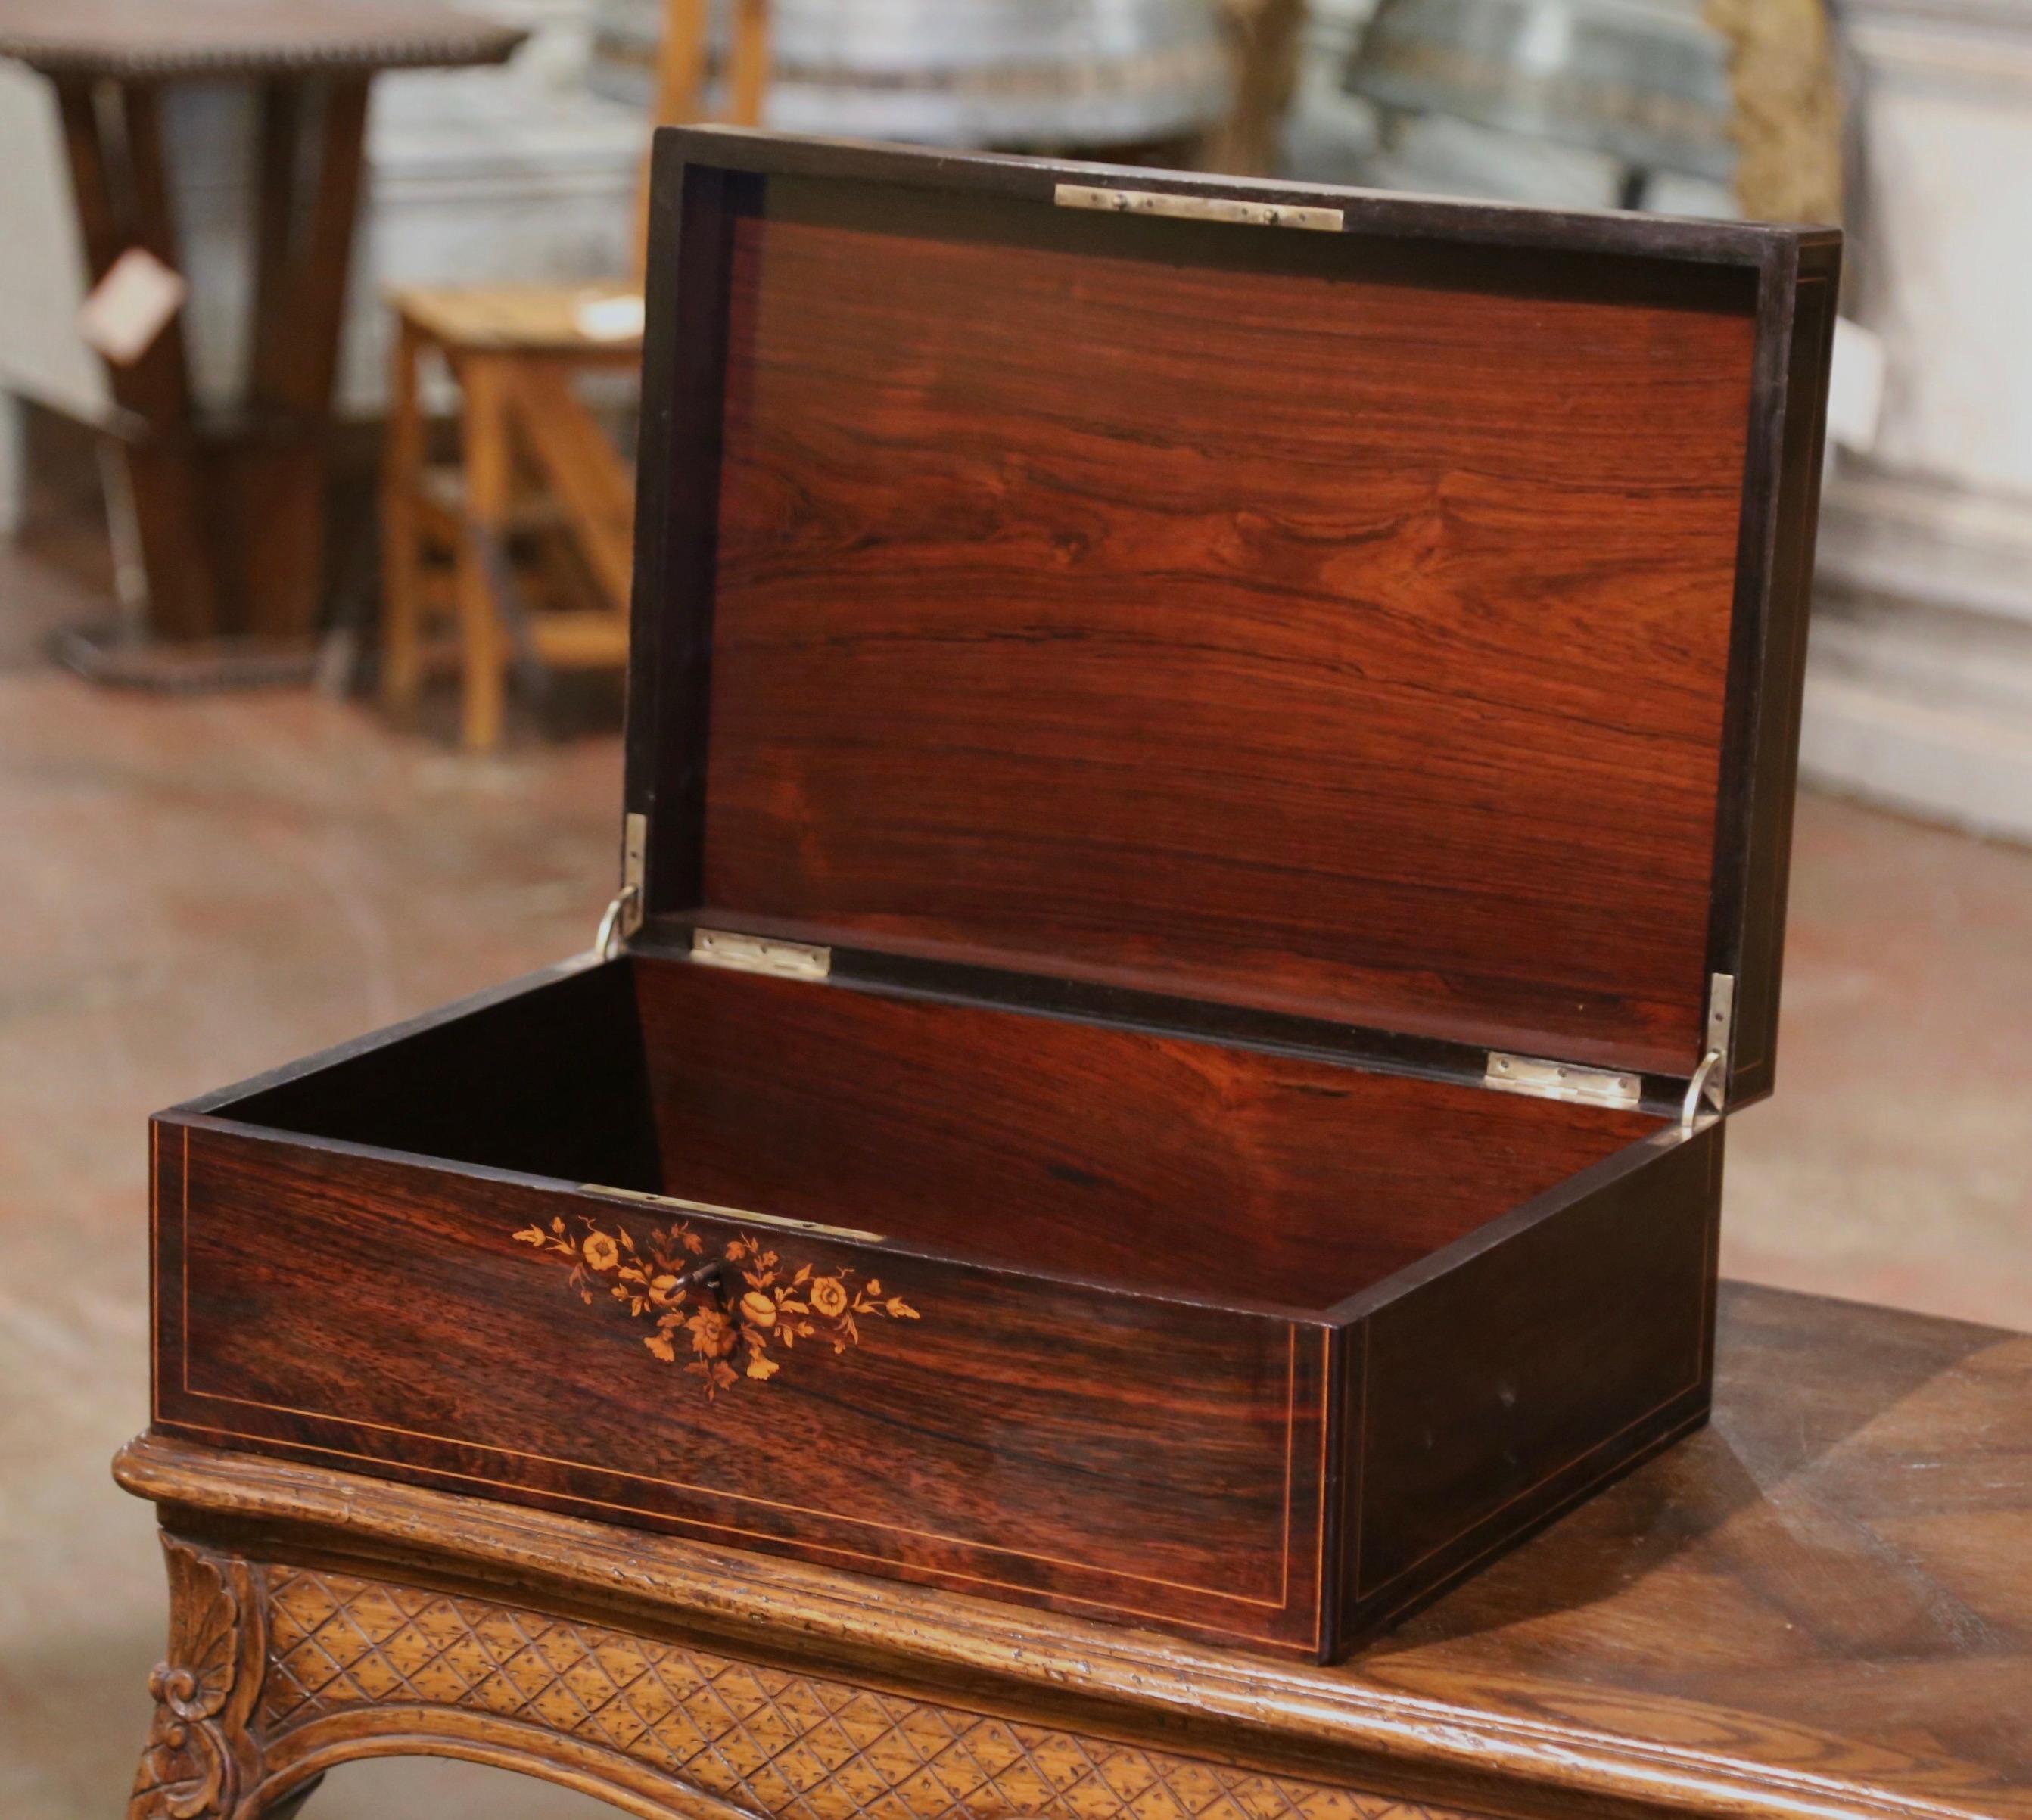 19th Century French Napoleon III Floral Inlaid Rosewood Decorative Jewelry Box For Sale 3